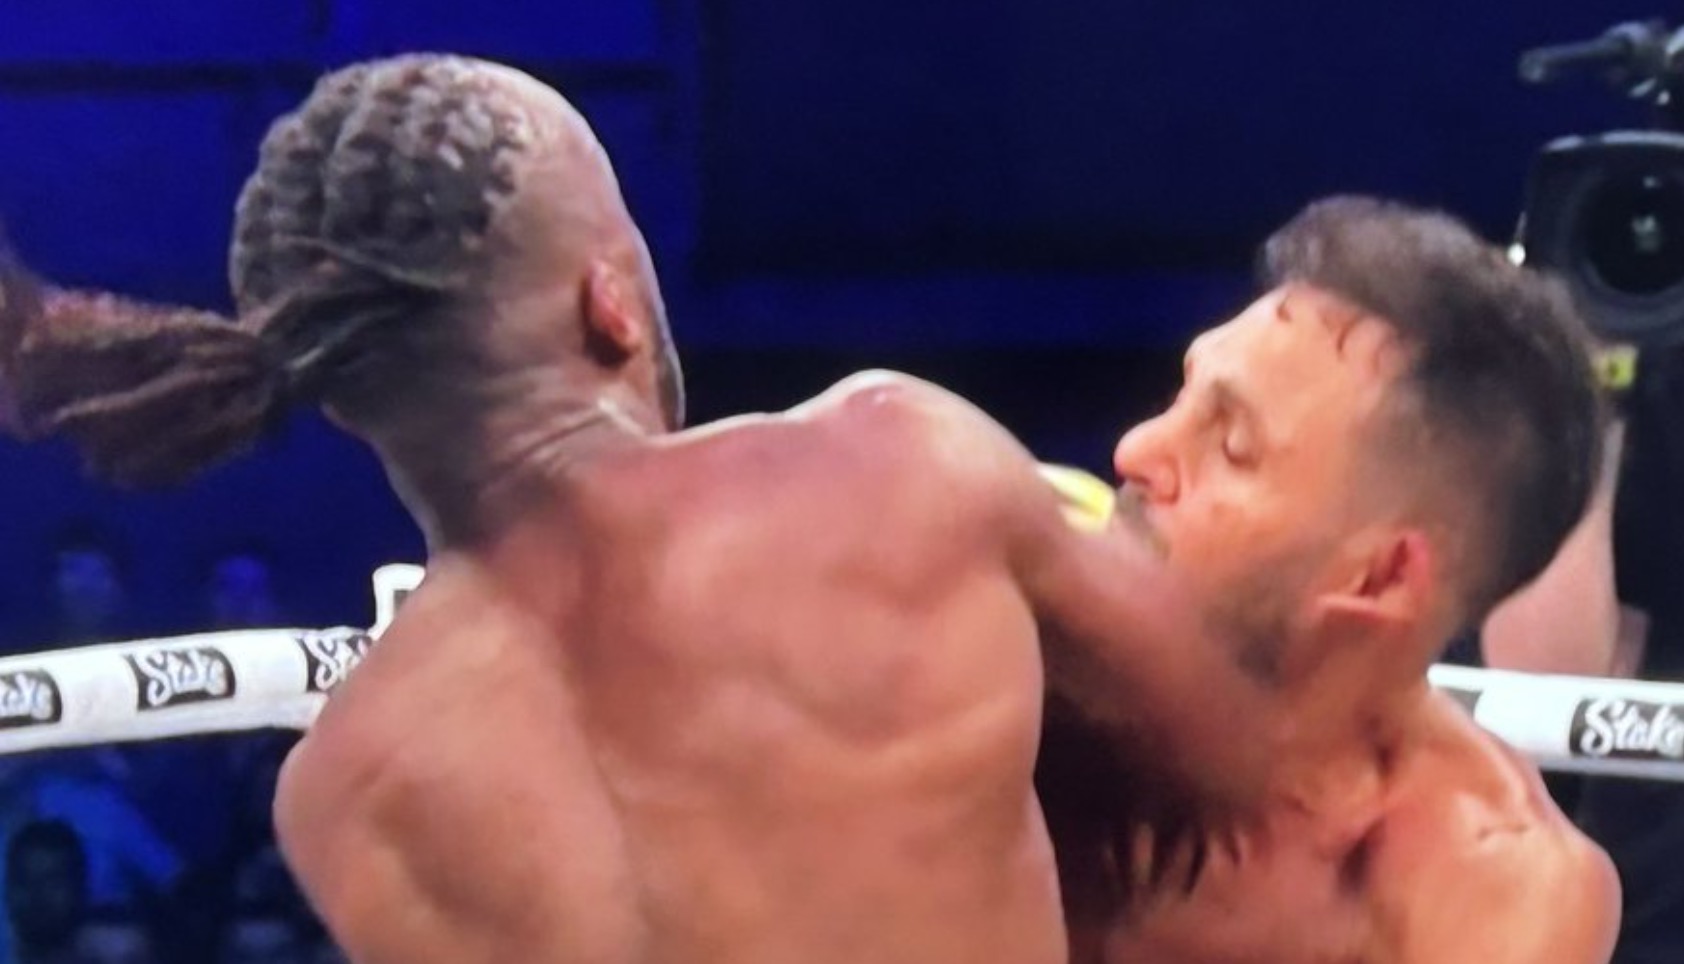 Video of KSI Knocking Out Joe Fournier With an Elbow to The Jaw